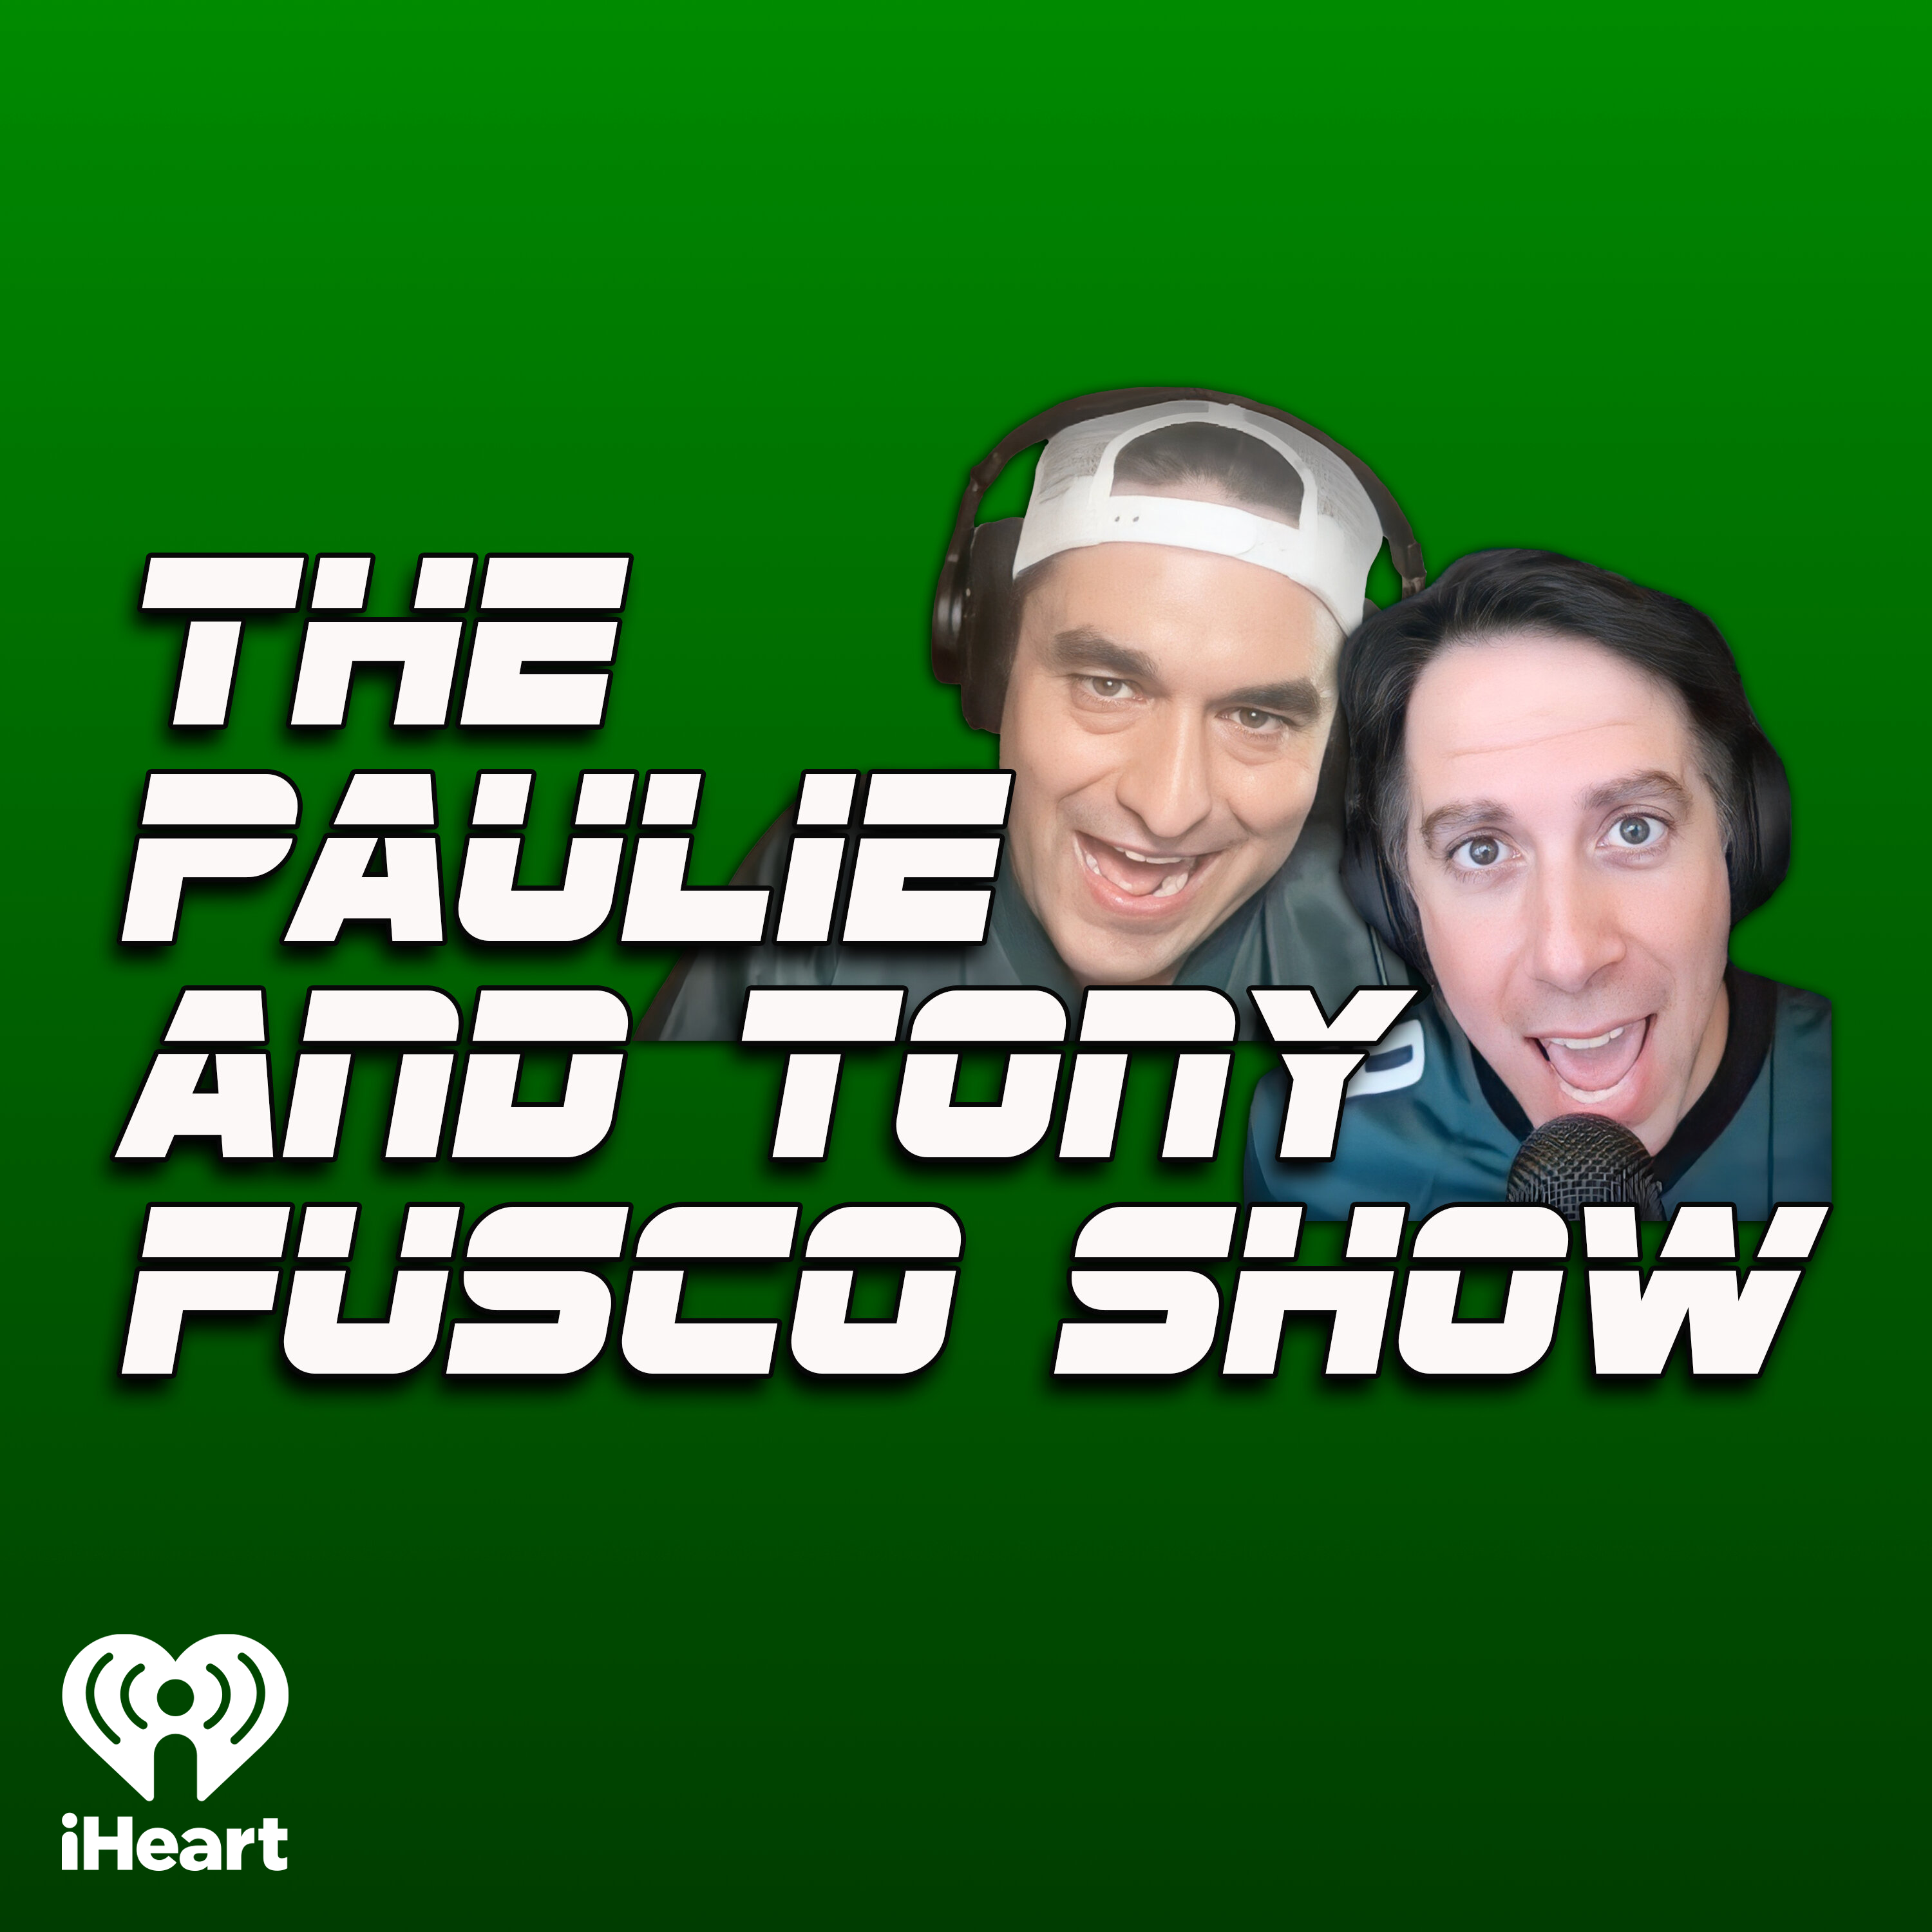 The Paulie & Tony Fusco Show: We DESTROY the MLB's DUMB new rules, Adnan Virk GETS KICKED OFF SHOW